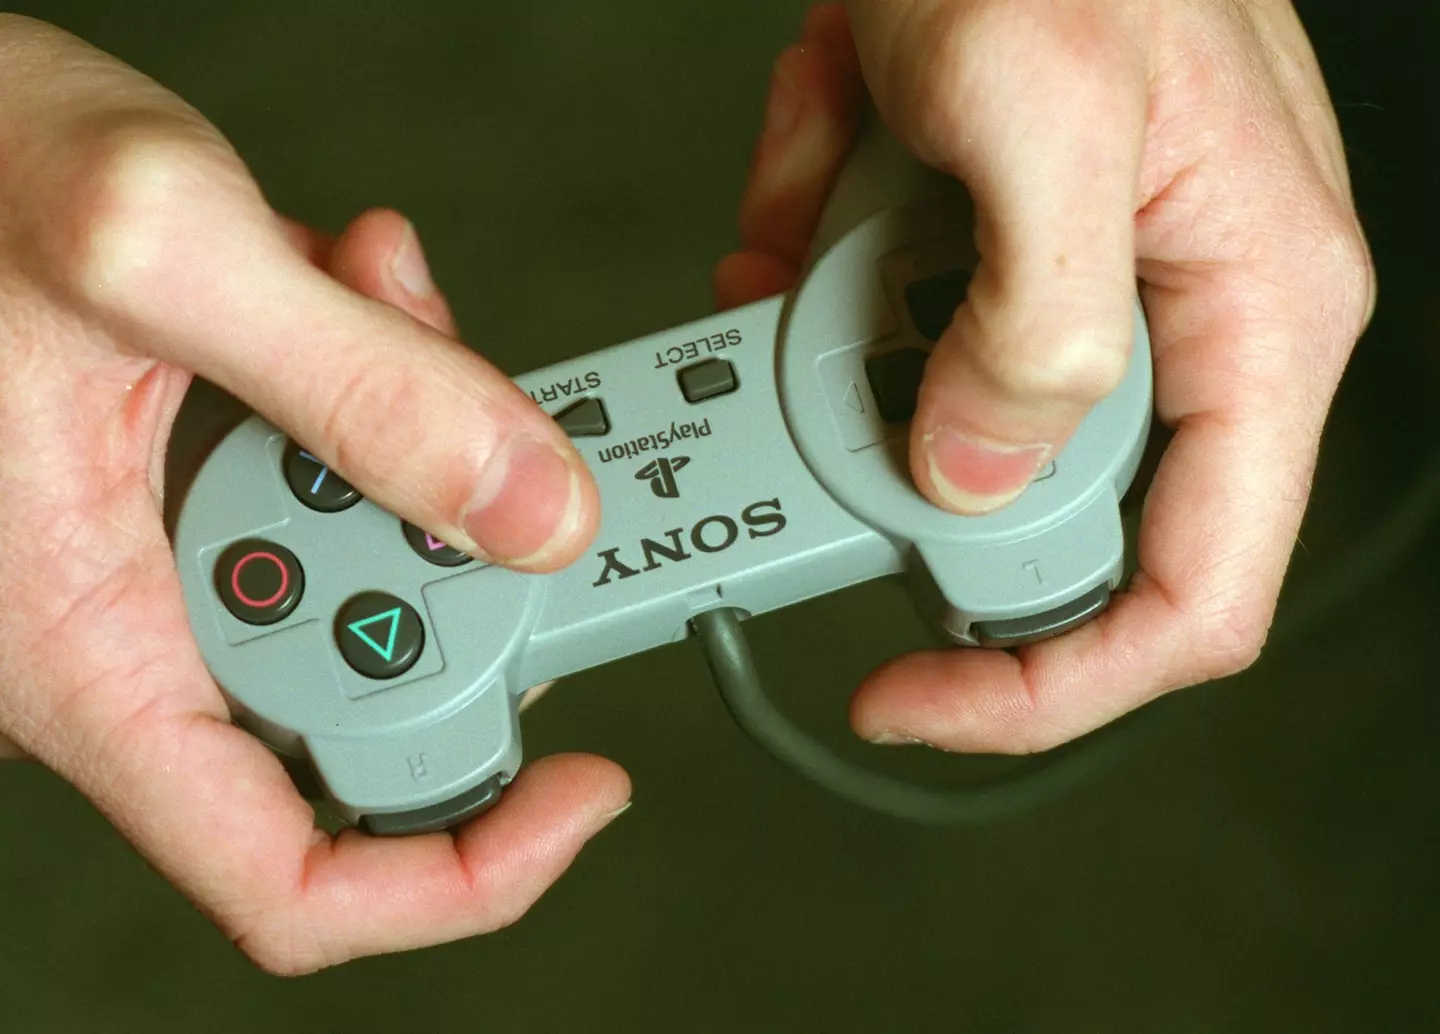 The OG controller. (Robert Lachman/Los Angeles Times via Getty Images)